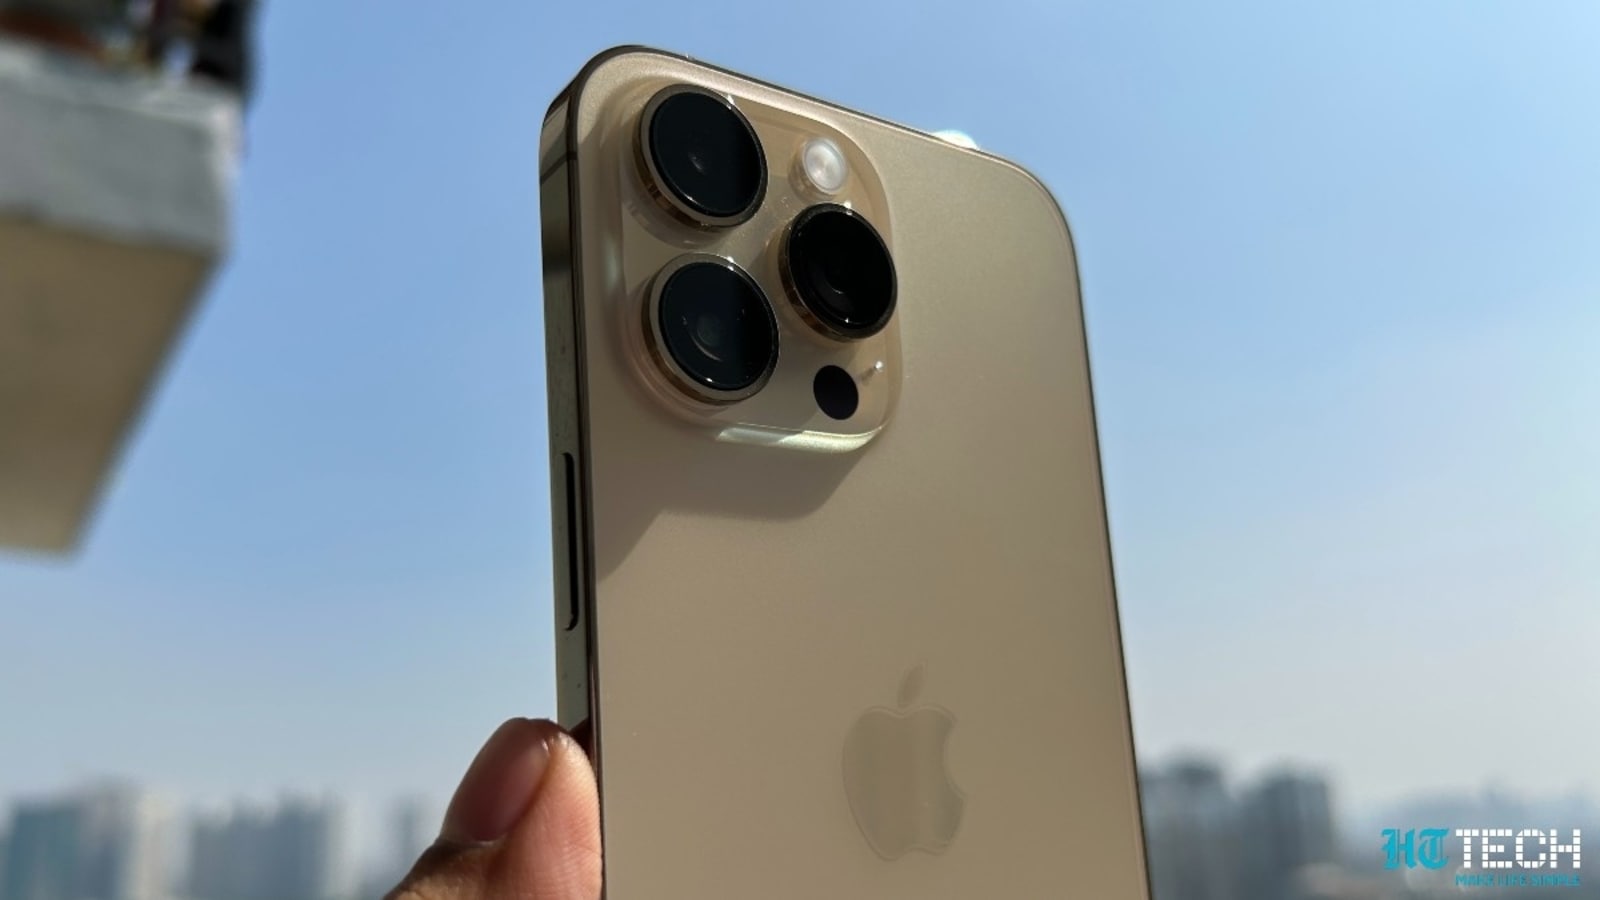 iPhone 11 Pro, iPhone 12 Pro user? Time to upgrade to iPhone 15 ...